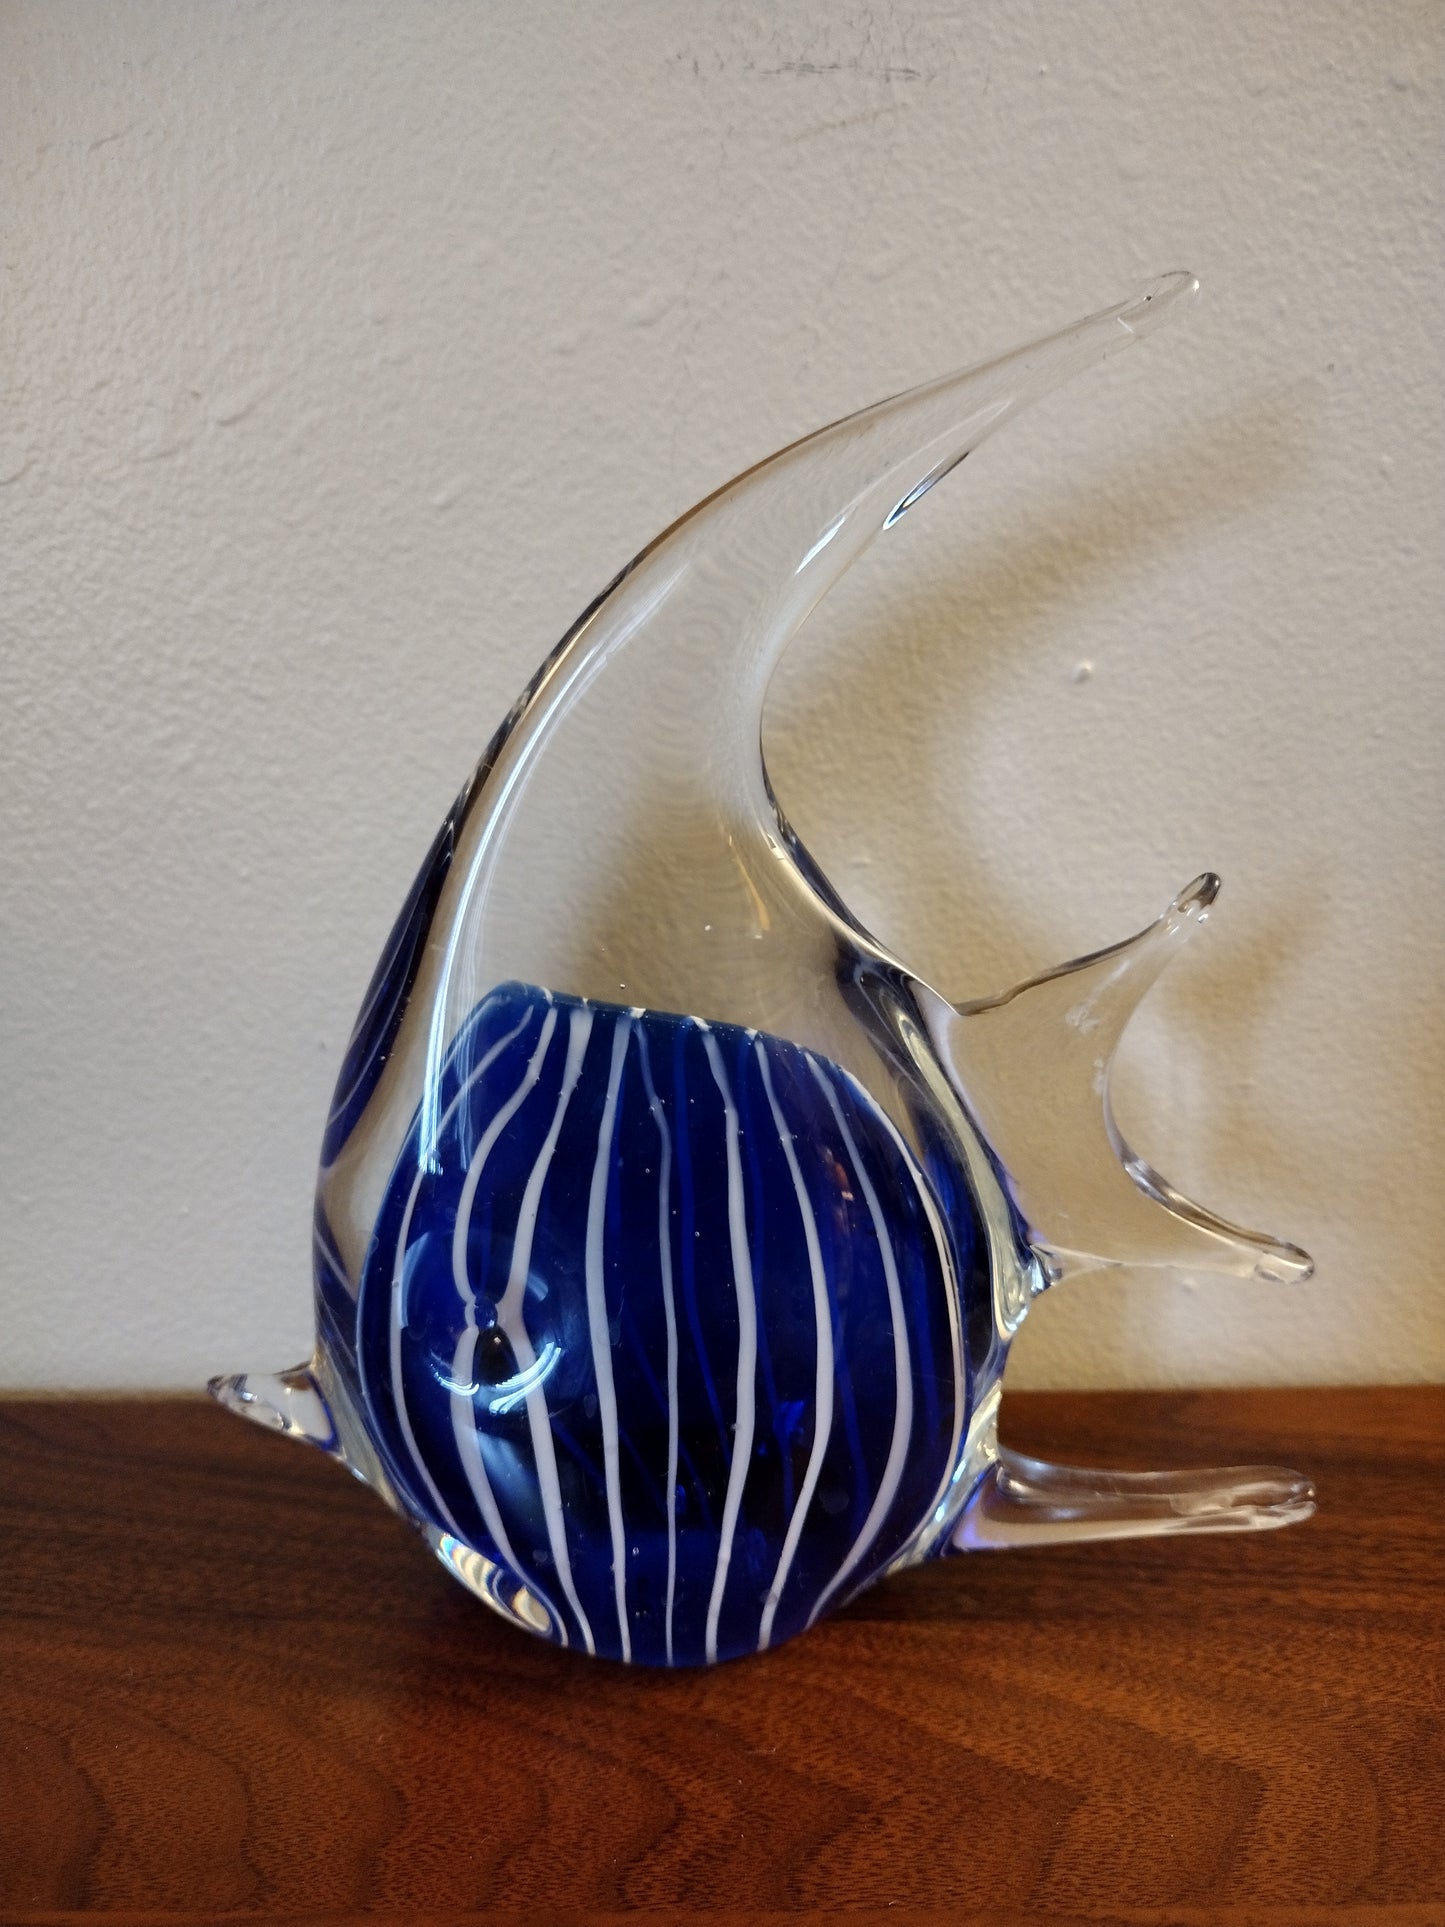 Blue With White Stripes Glass Angel Fish Paper Weight Figurine 4" Tall - Vintage